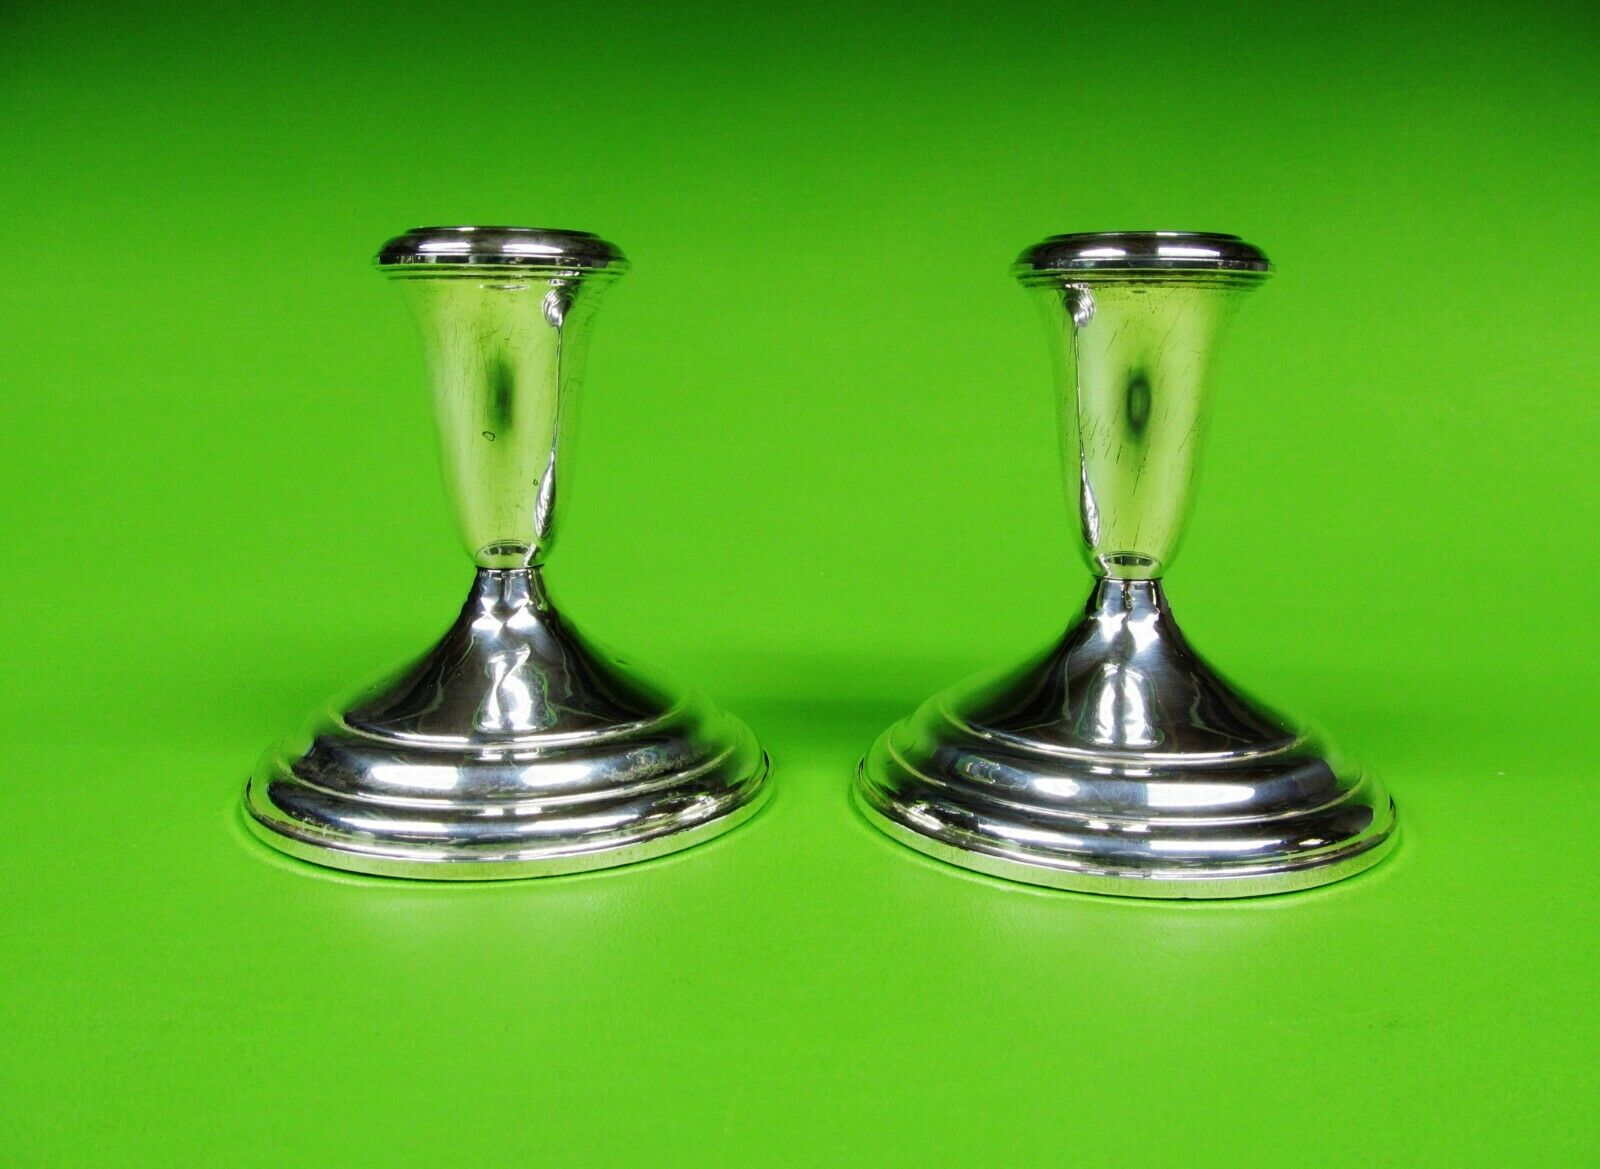 Lovely Pair Of Sterling Silver Weighted Candle Holder By Towle. Measures: 4 1/2"